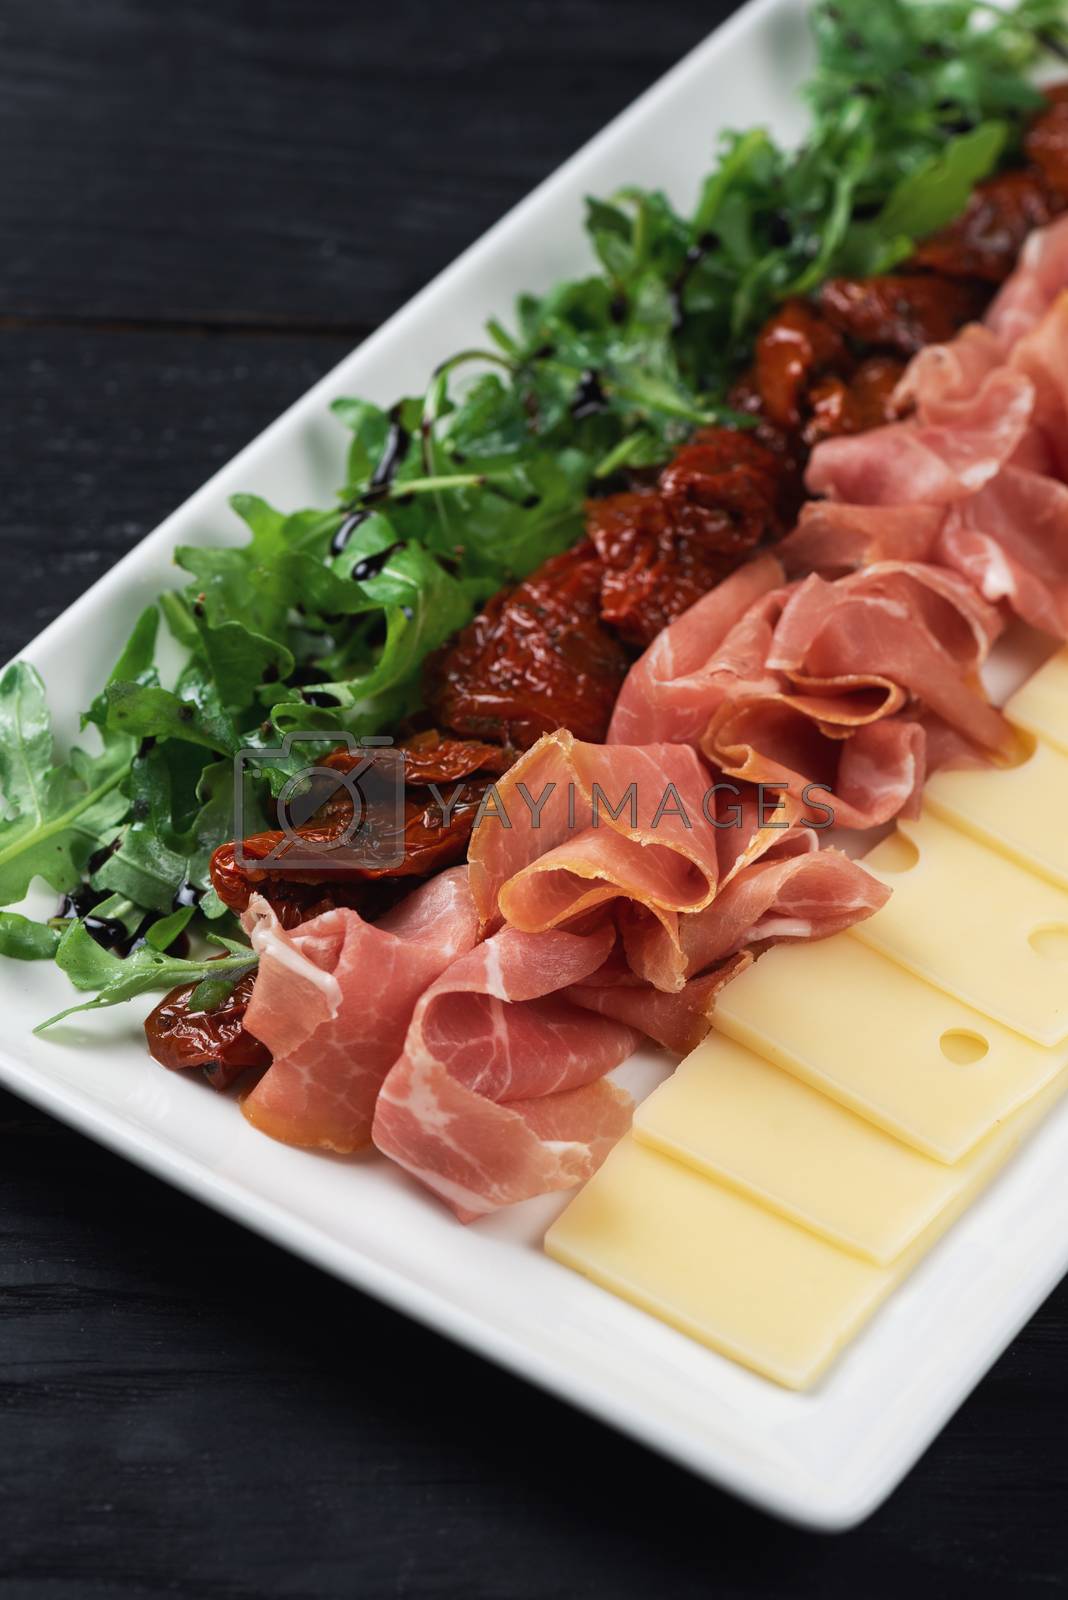 Royalty free image of prosciutto cheese and sun-dried tomatoes by rusak